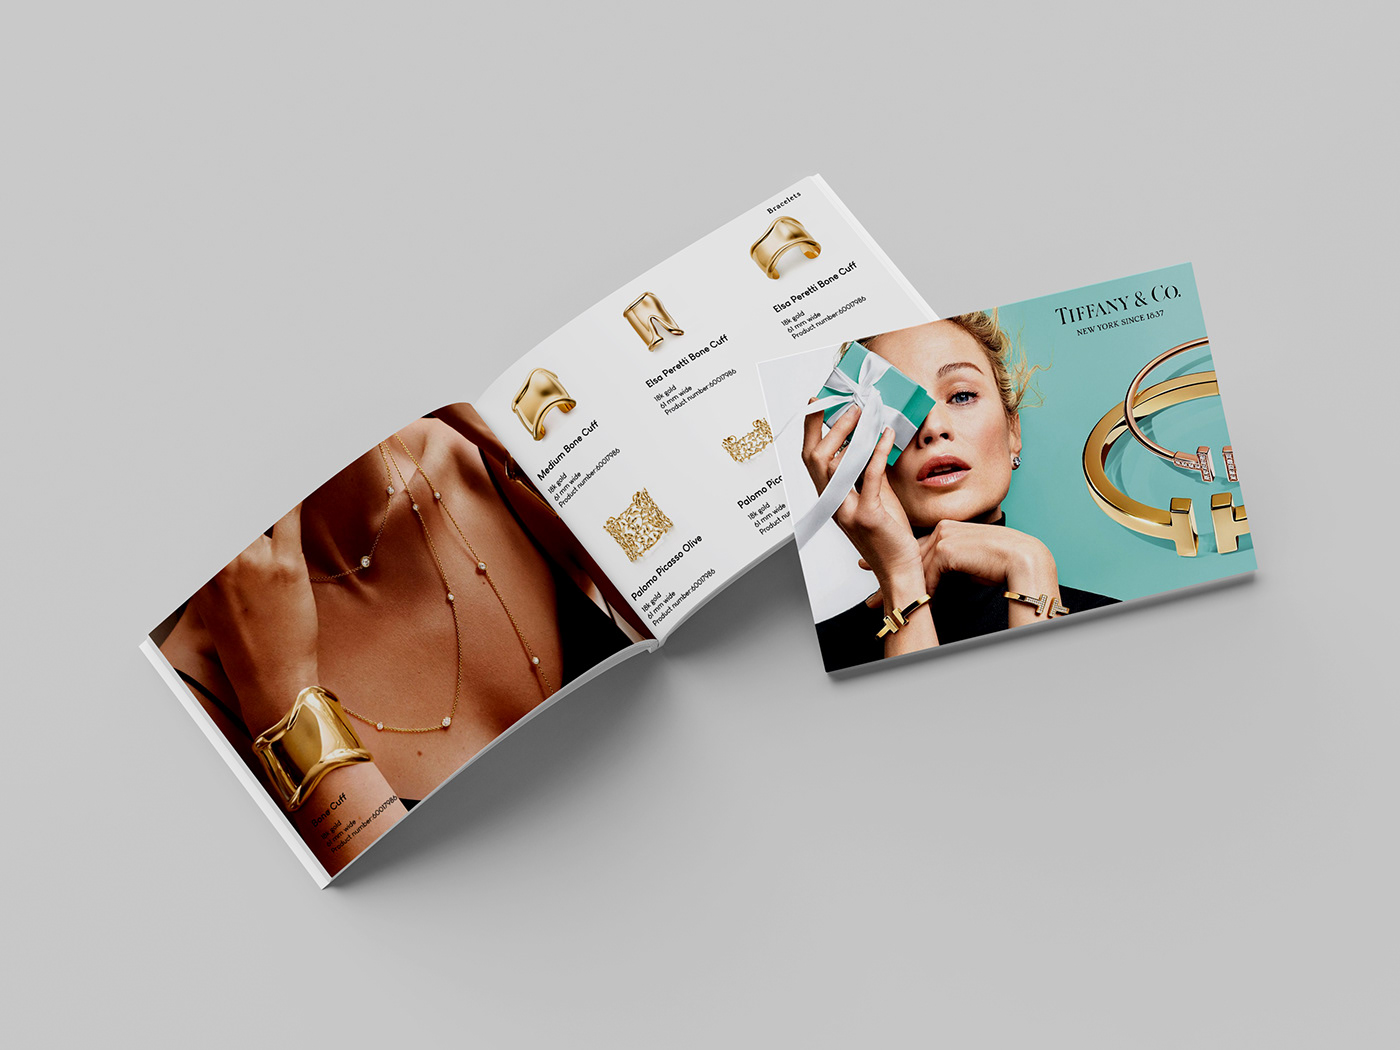 Catalogue Catalogue design tiffany & co Jewellery catalog earrings Necklace silver gold Invoice Design